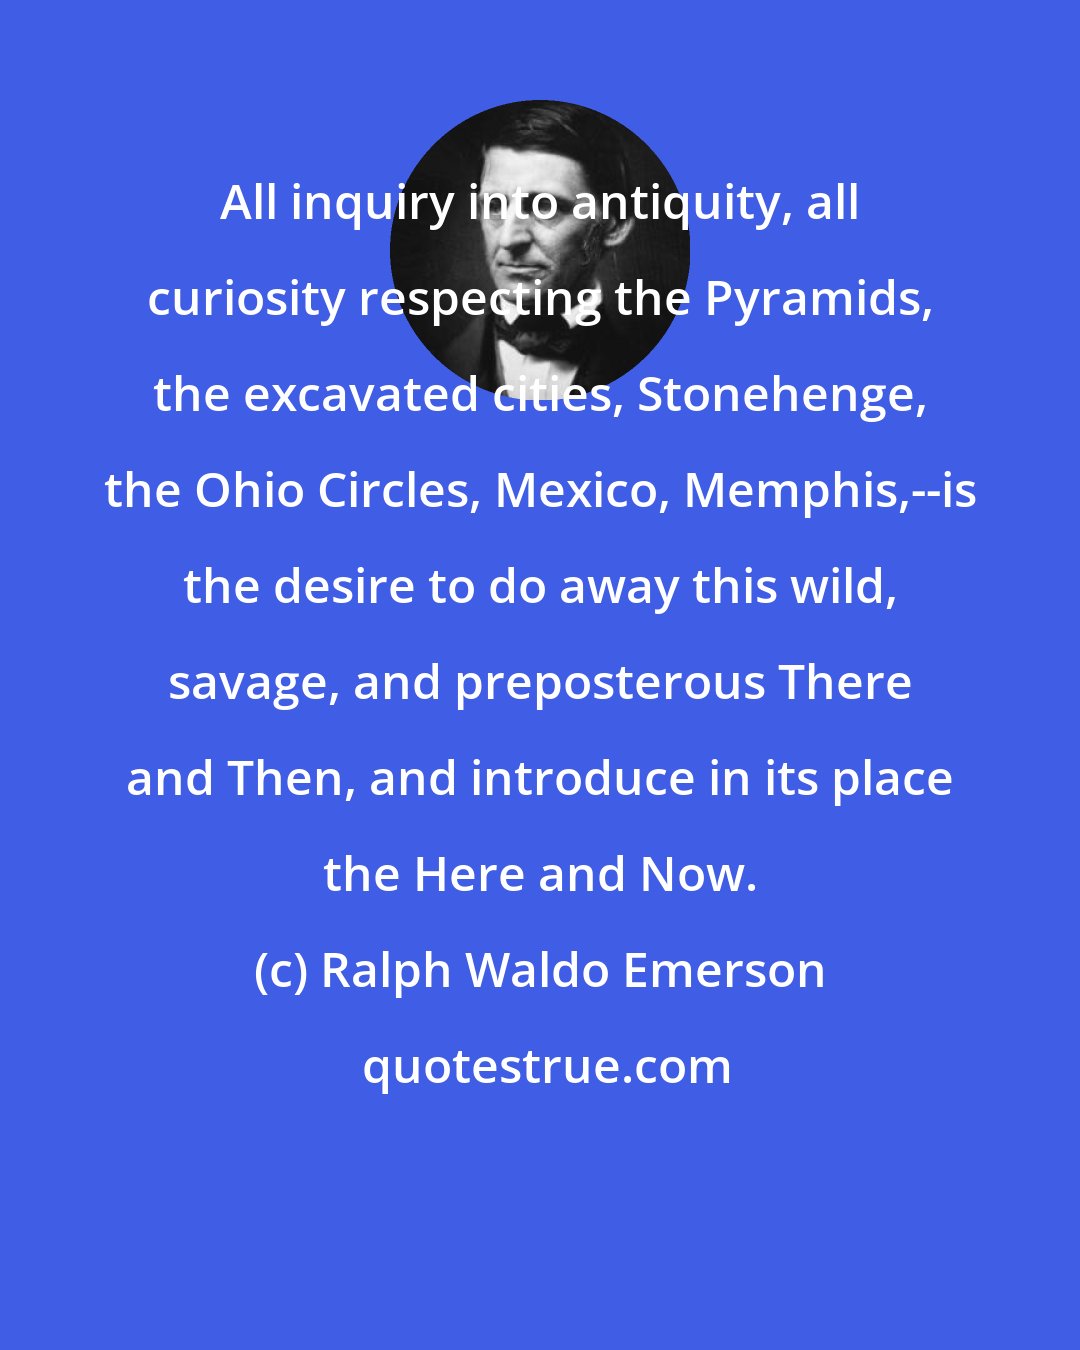 Ralph Waldo Emerson: All inquiry into antiquity, all curiosity respecting the Pyramids, the excavated cities, Stonehenge, the Ohio Circles, Mexico, Memphis,--is the desire to do away this wild, savage, and preposterous There and Then, and introduce in its place the Here and Now.